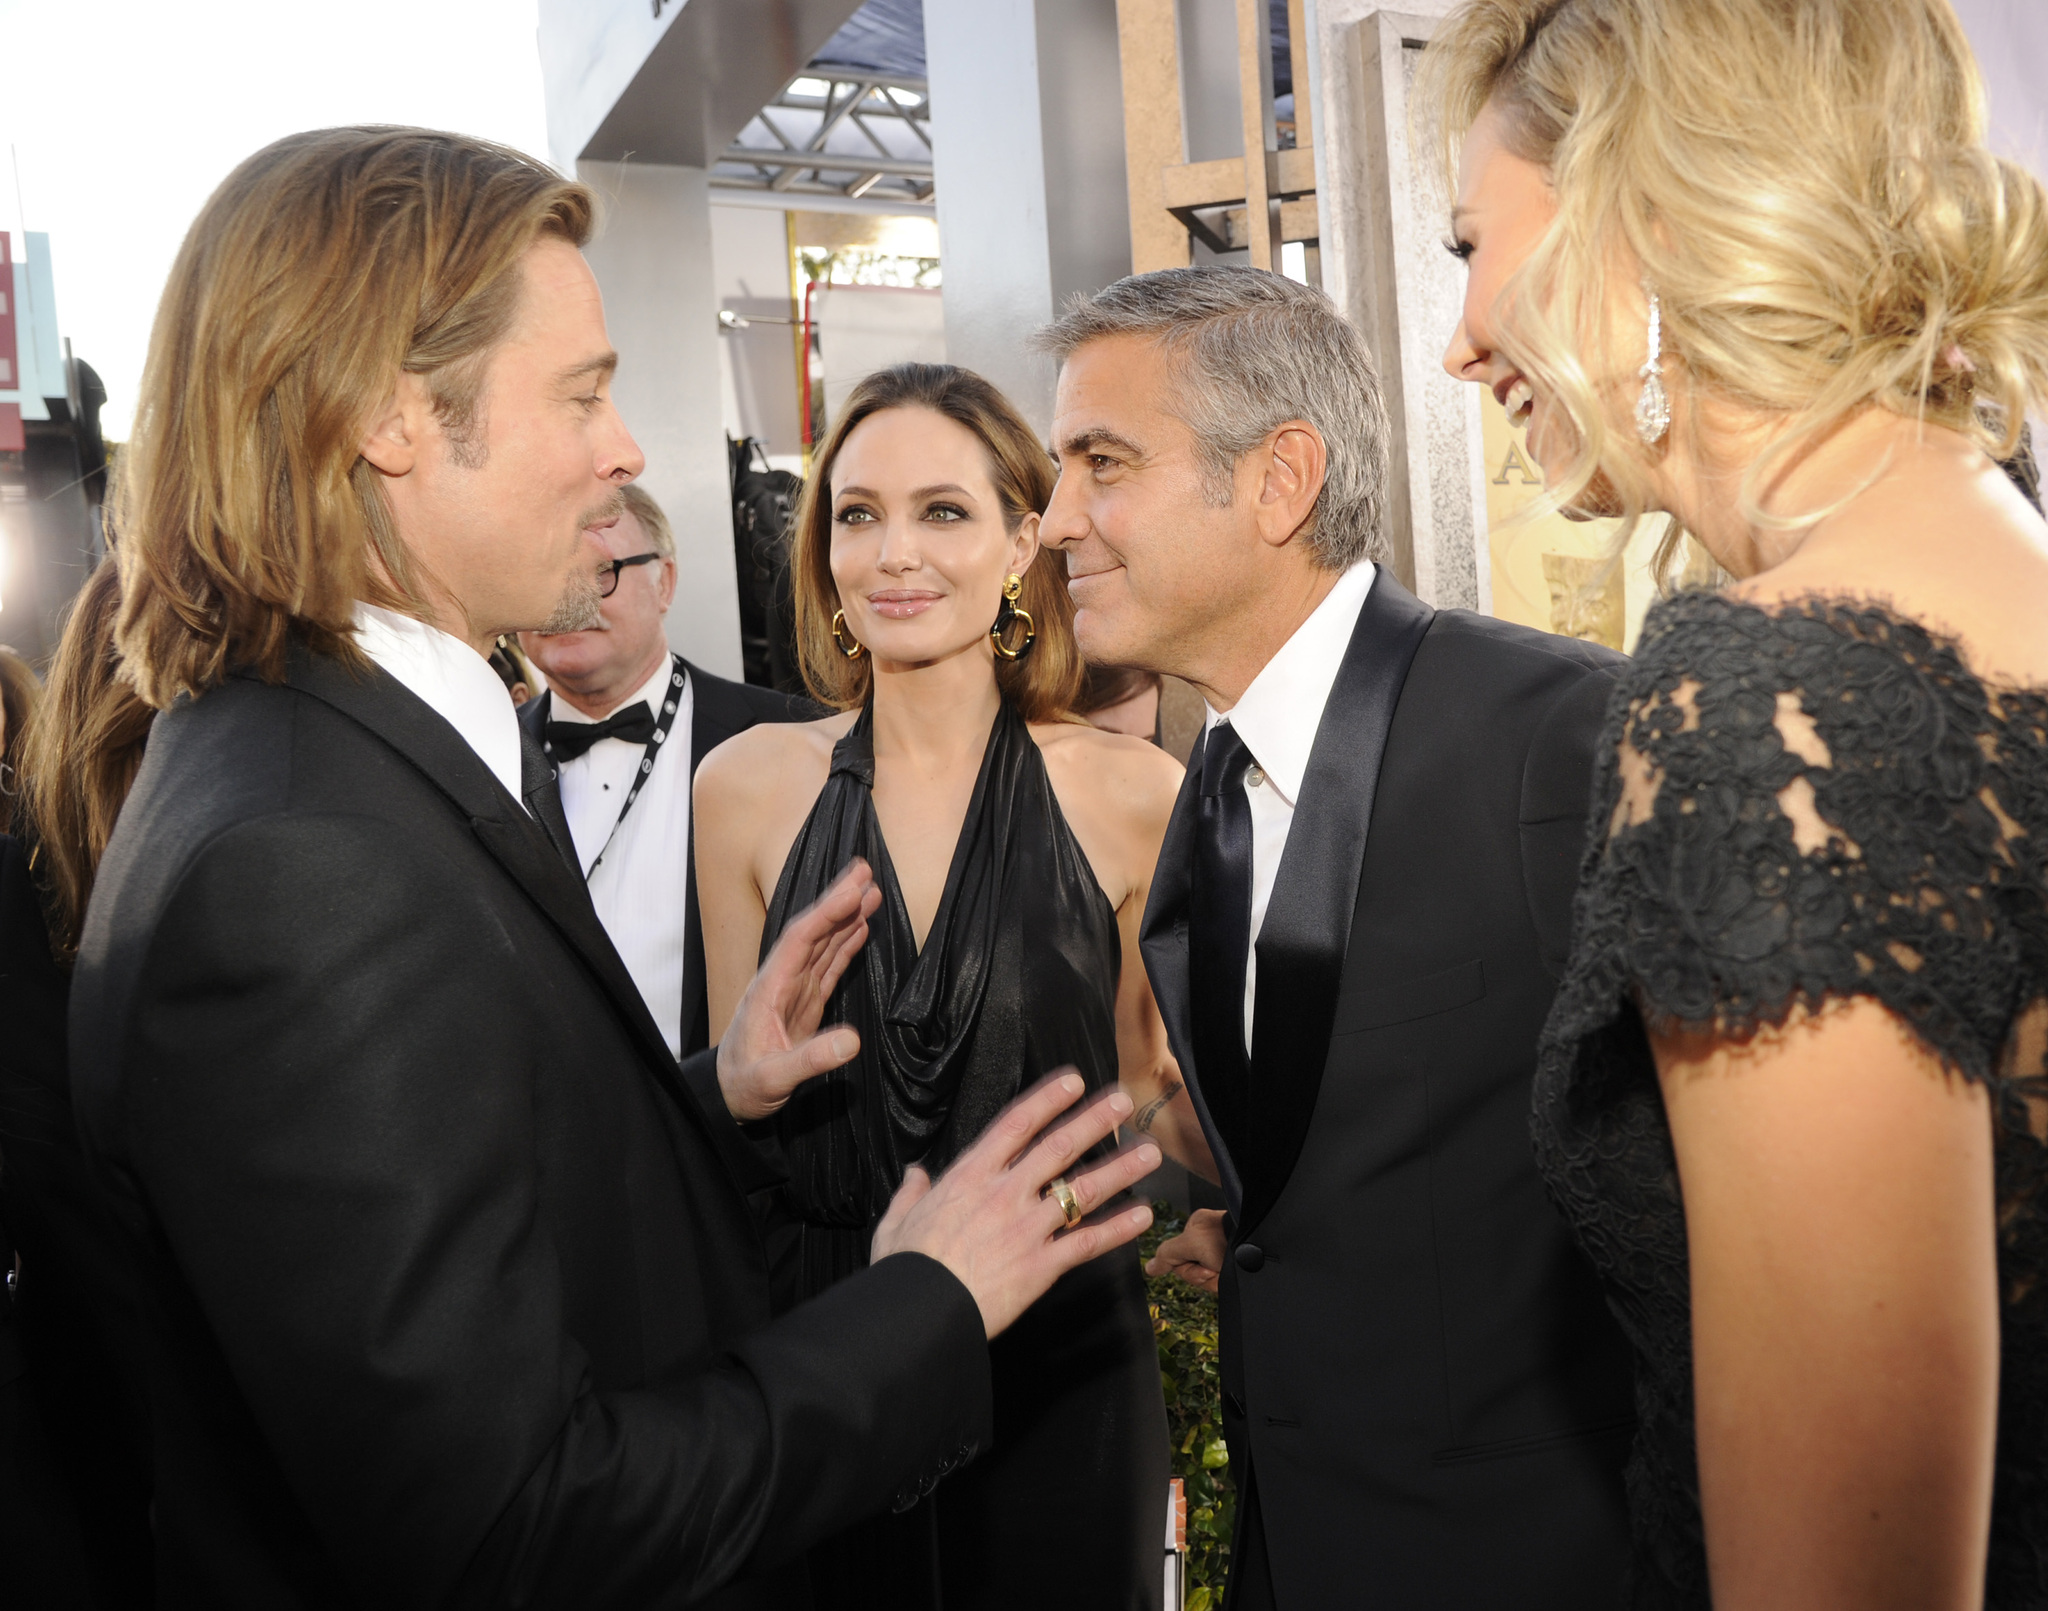 Brad Pitt, George Clooney, Angelina Jolie and Stacy Keibler